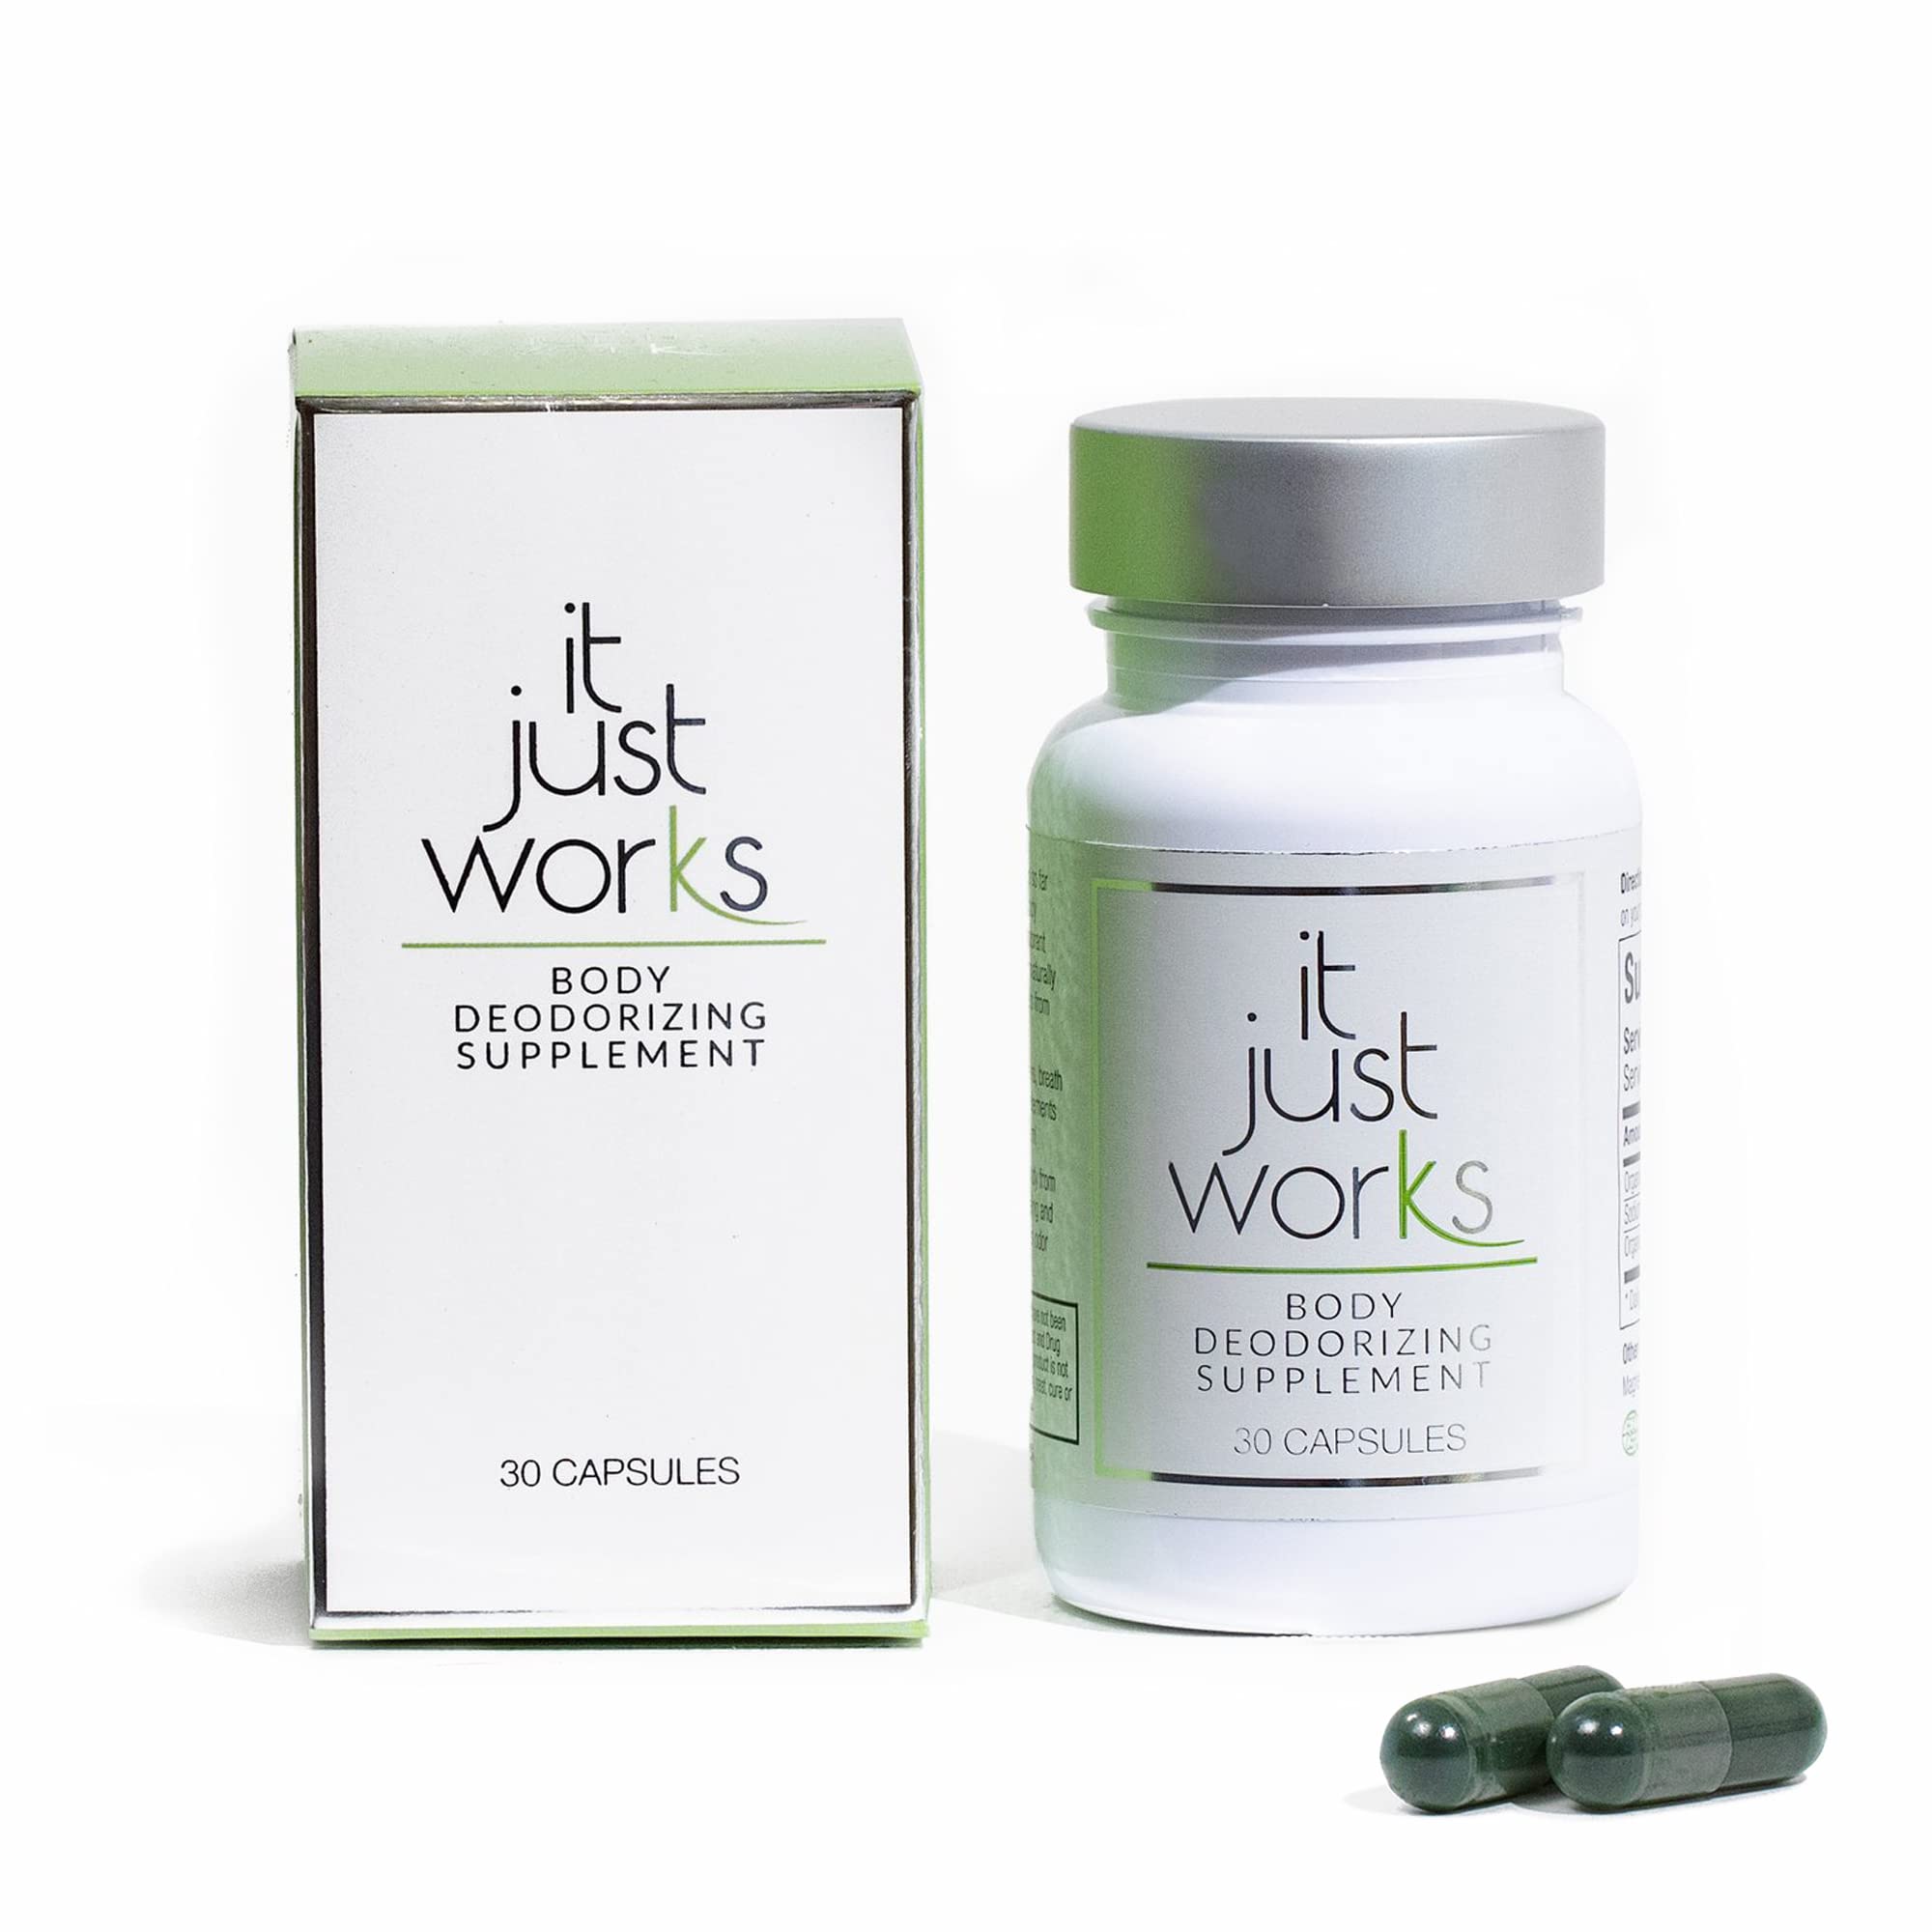 It Just Works All Natural Full Body Deodorizing Supplement for Underarms and Private Parts | Vegan & Organic Deodorant That Works from The Inside Out (30 Count)